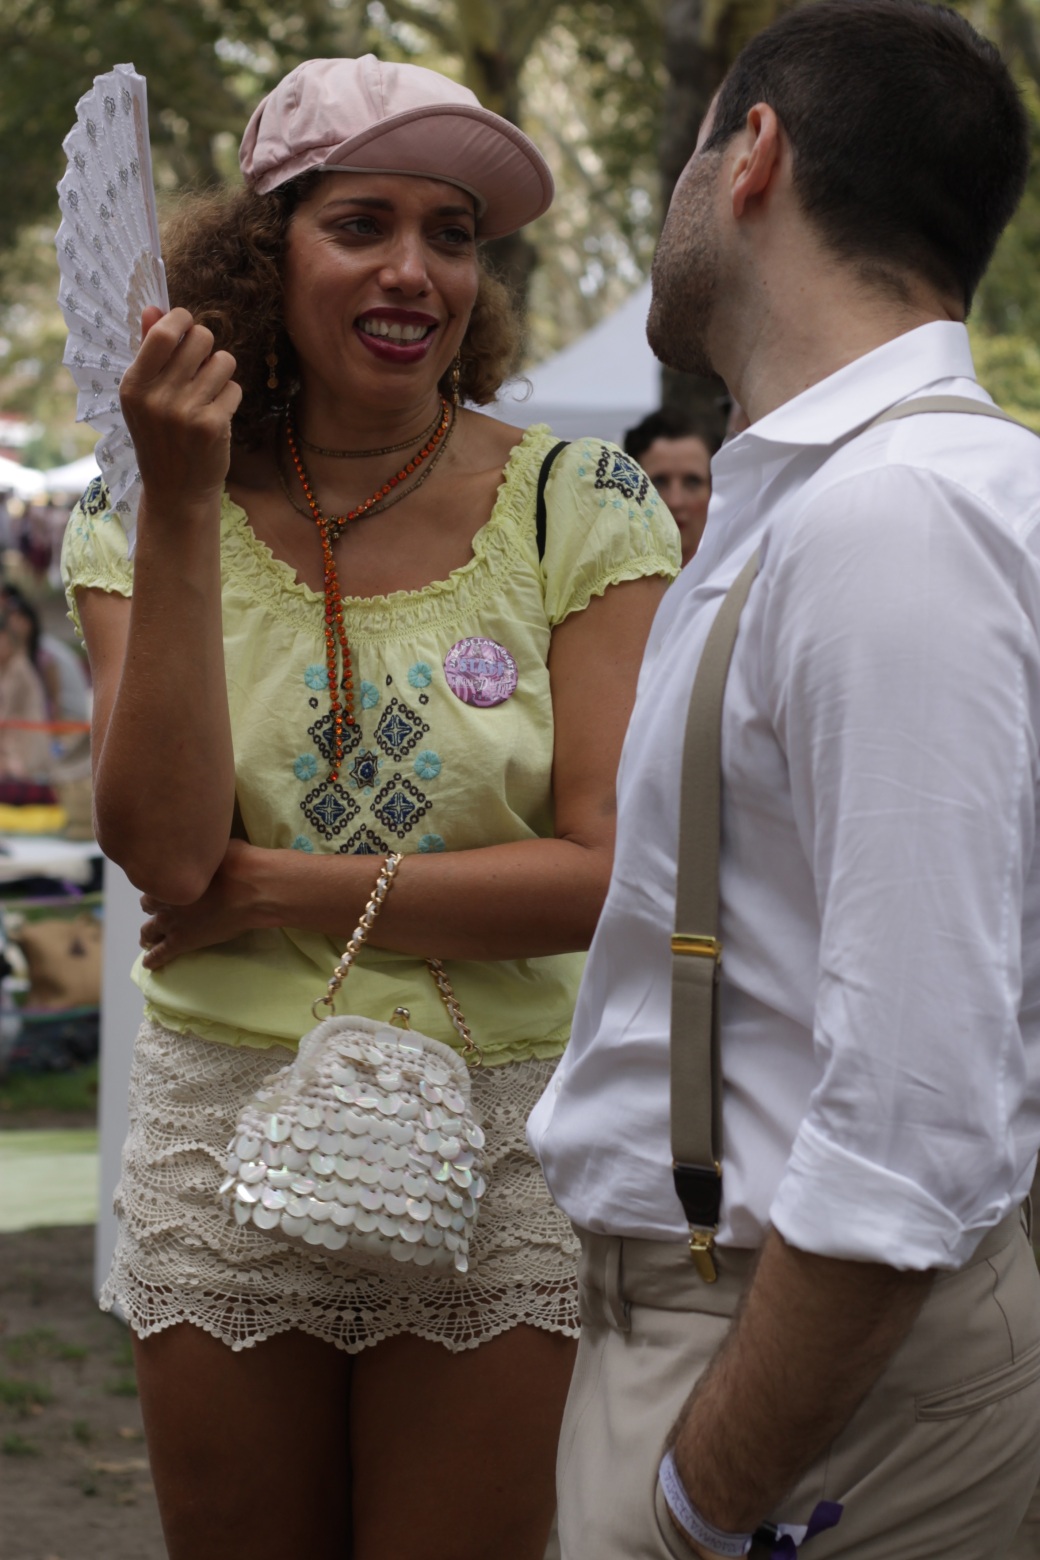 new york city governors island jazz age lawn party august 17 2014 15